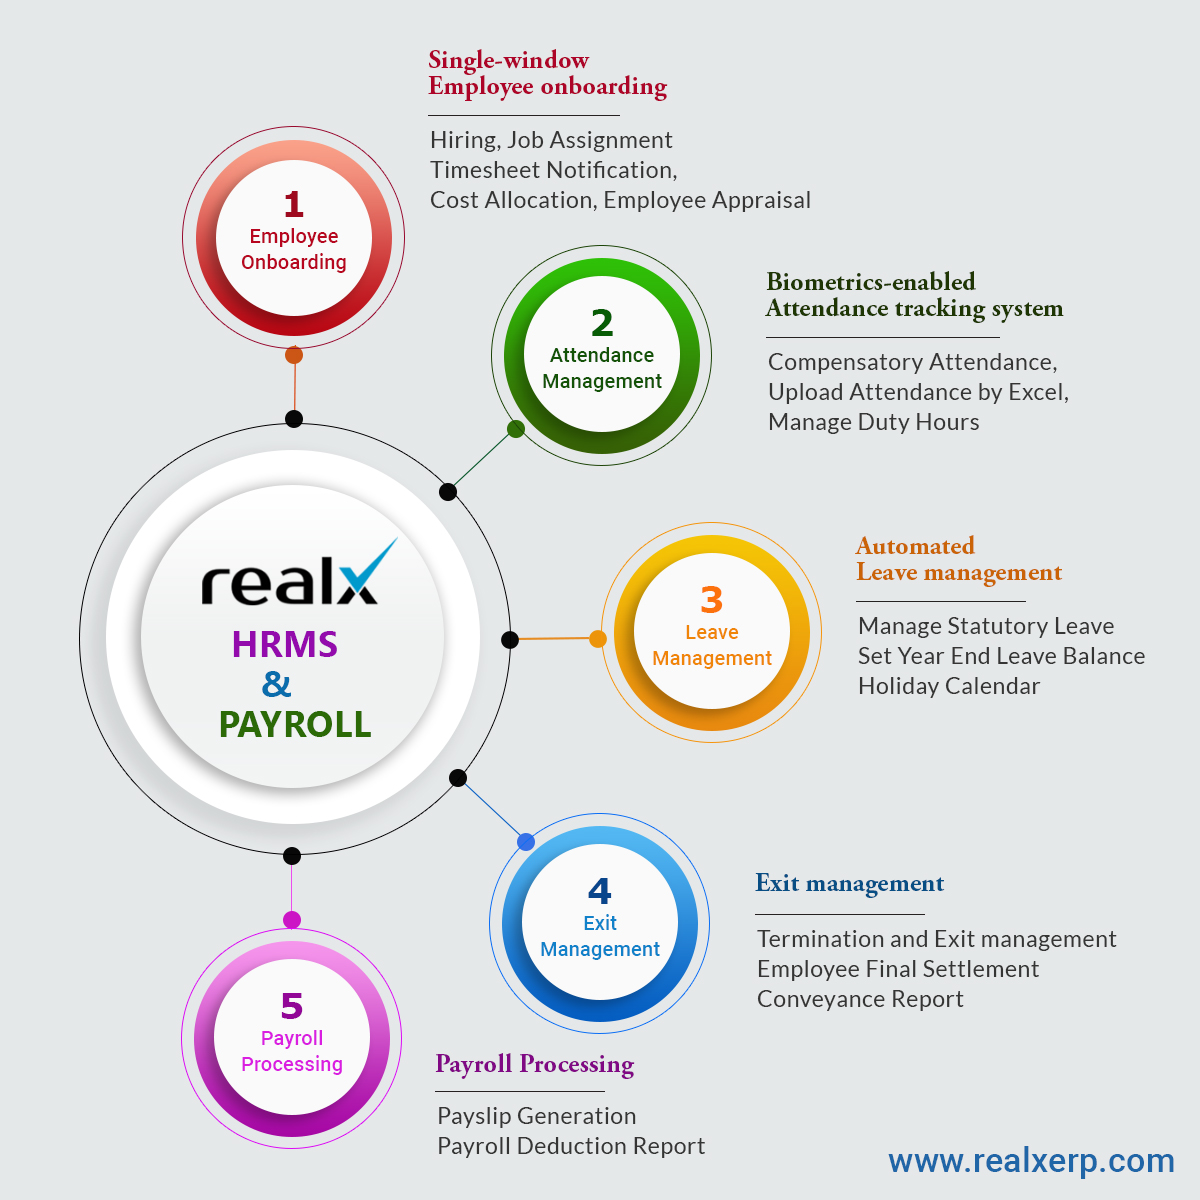 Realx ERP simplifies and optimizes all your HR processes, making managing human resources smooth, seamless, effortless and efficient.